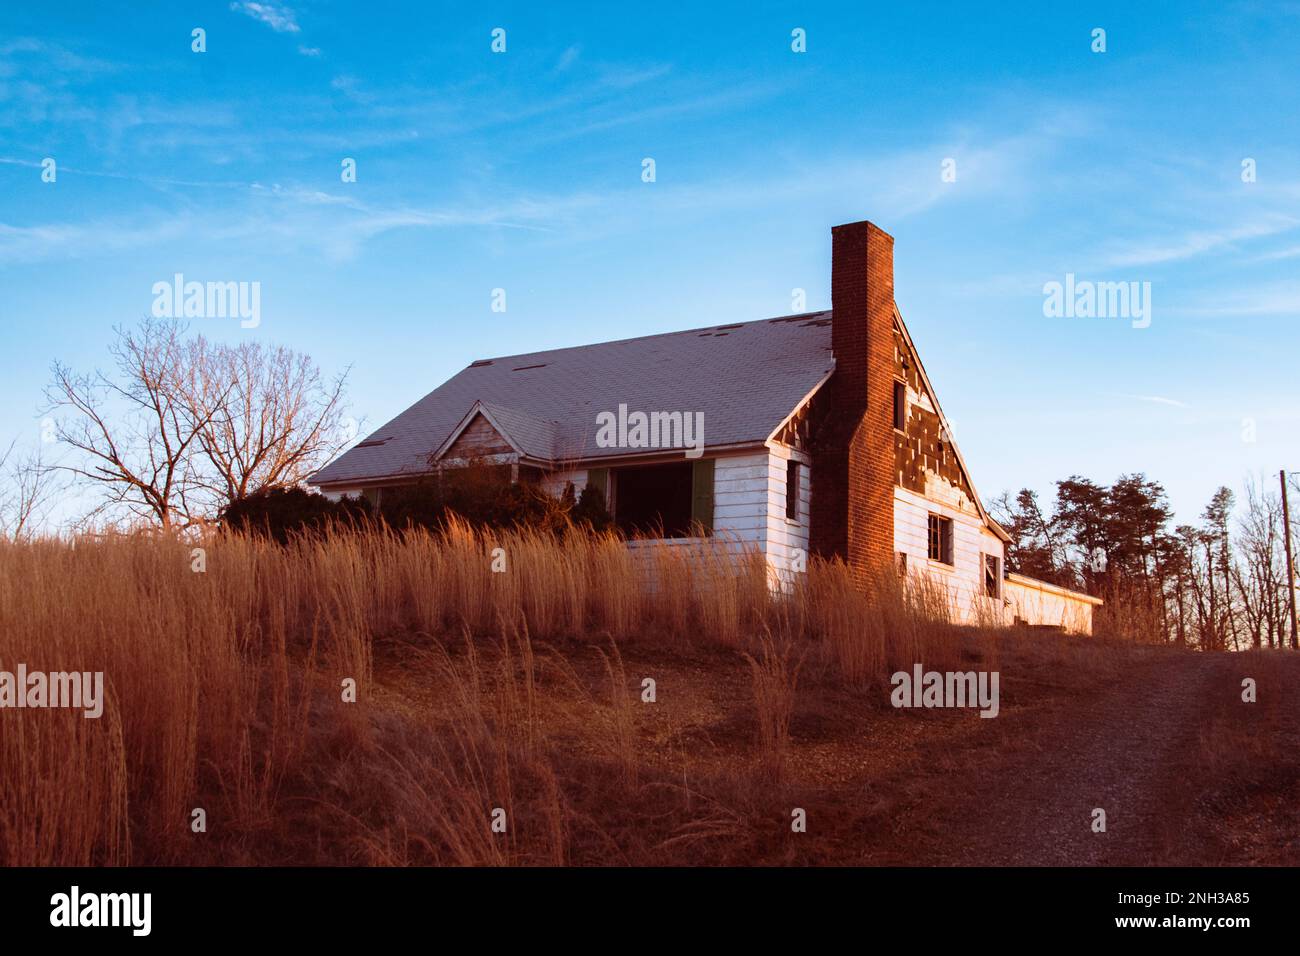 Rundown abandoned house, glowing in the evening sunlight. Stock Photo